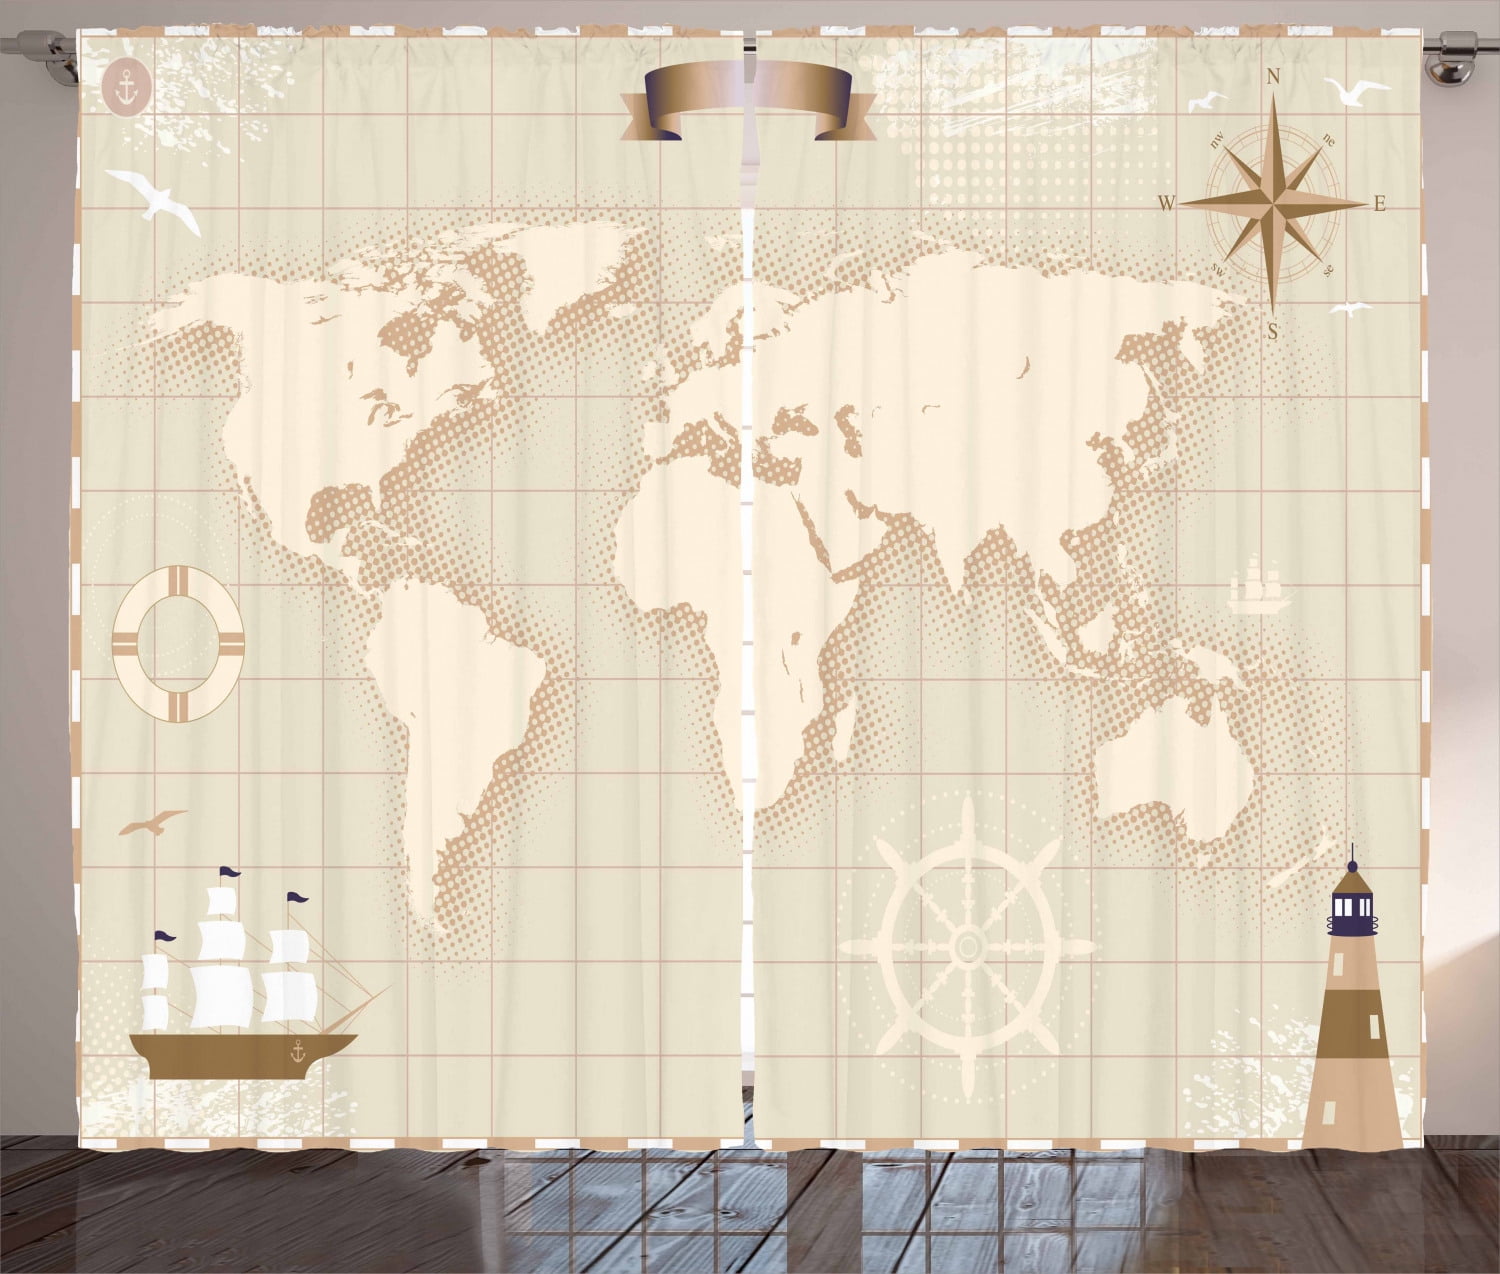 Kitchen Curtains and Valances Map Thermal Insulated Tie Up Window Blind Map of The World Geography Continents and Countries Physical Cartography Image Home Fashion Window Treatment 42 W x 72 L